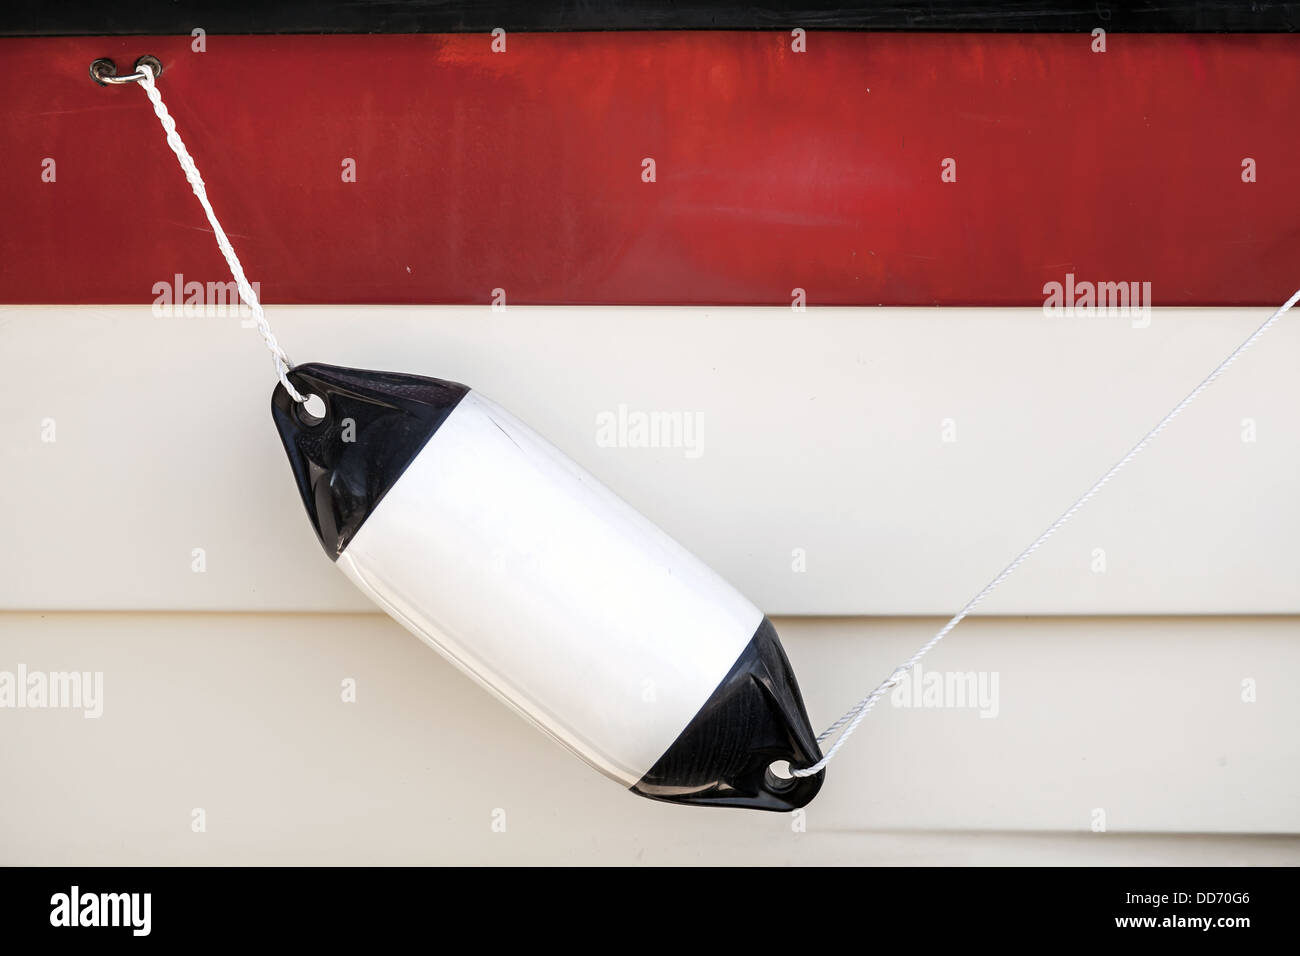 Small ship bump element hanging above white and red yacht hull Stock Photo